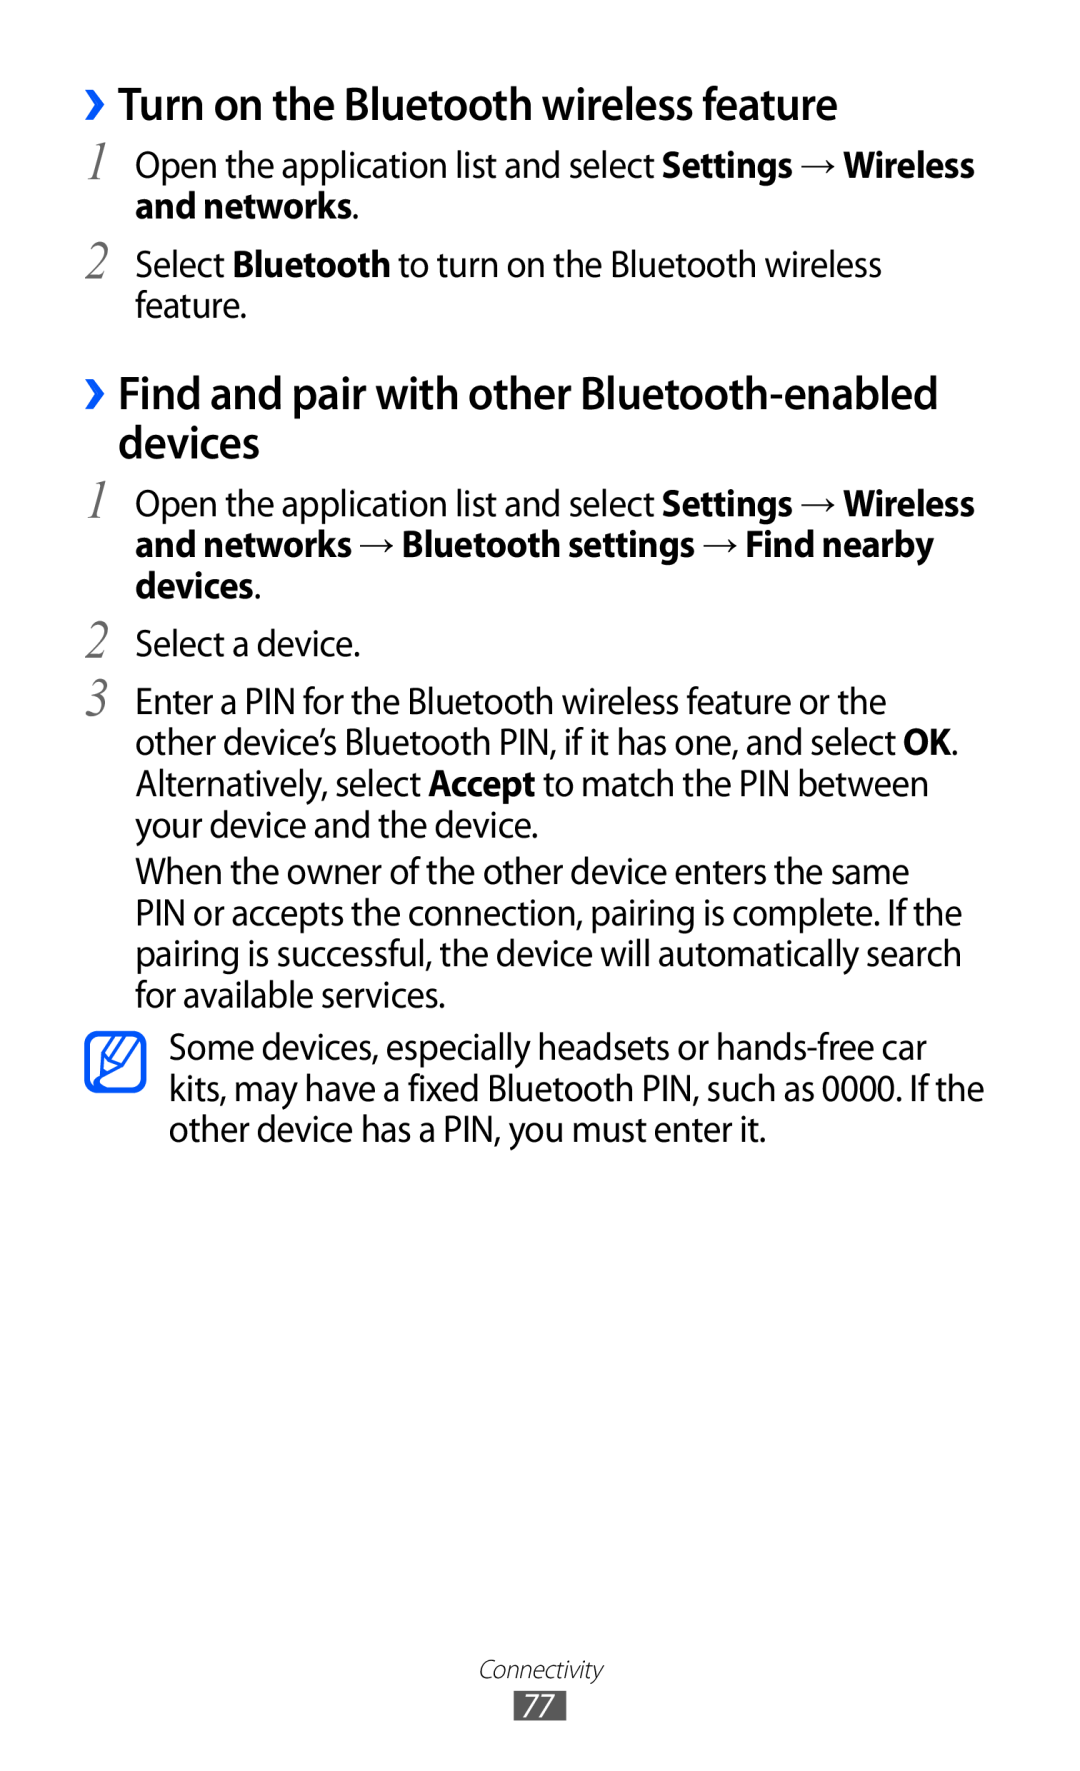 Samsung GT-P7310FKAO2C ››Turn on the Bluetooth wireless feature, ››Find and pair with other Bluetooth-enabled devices 